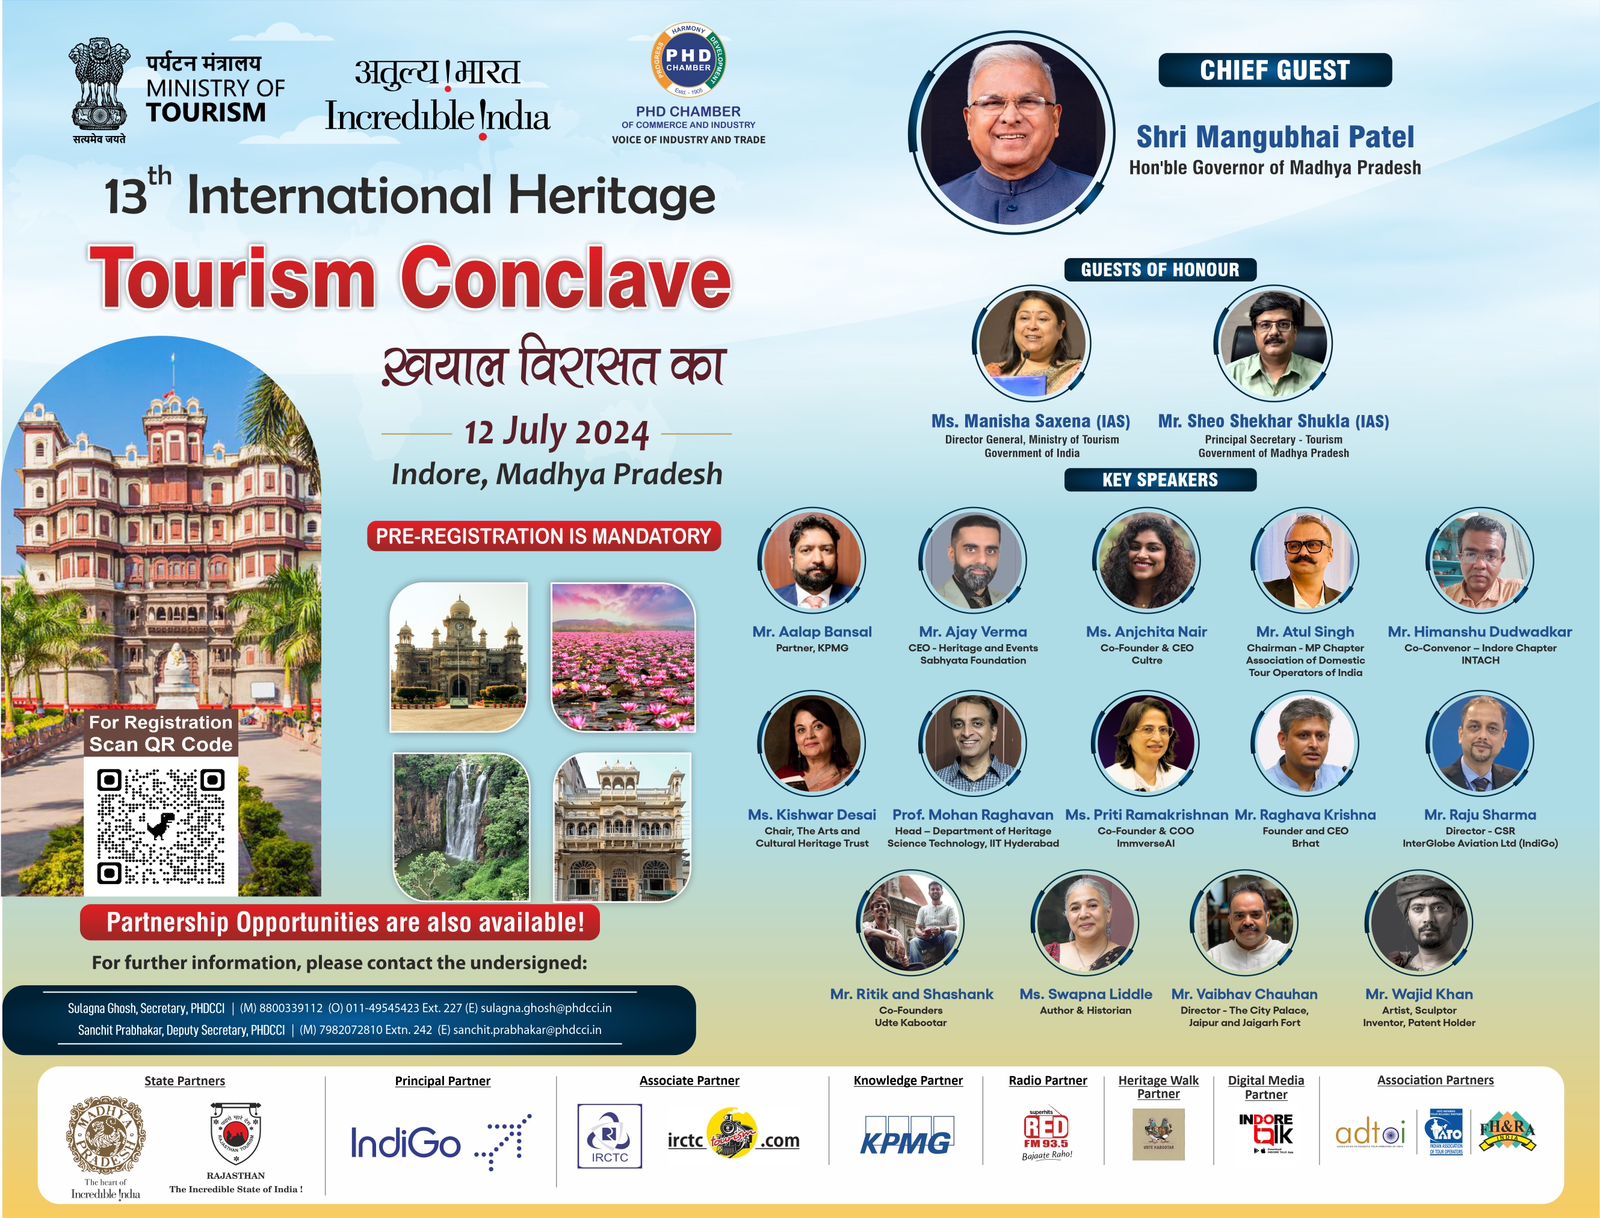 13th International Heritage Tourism Conclave